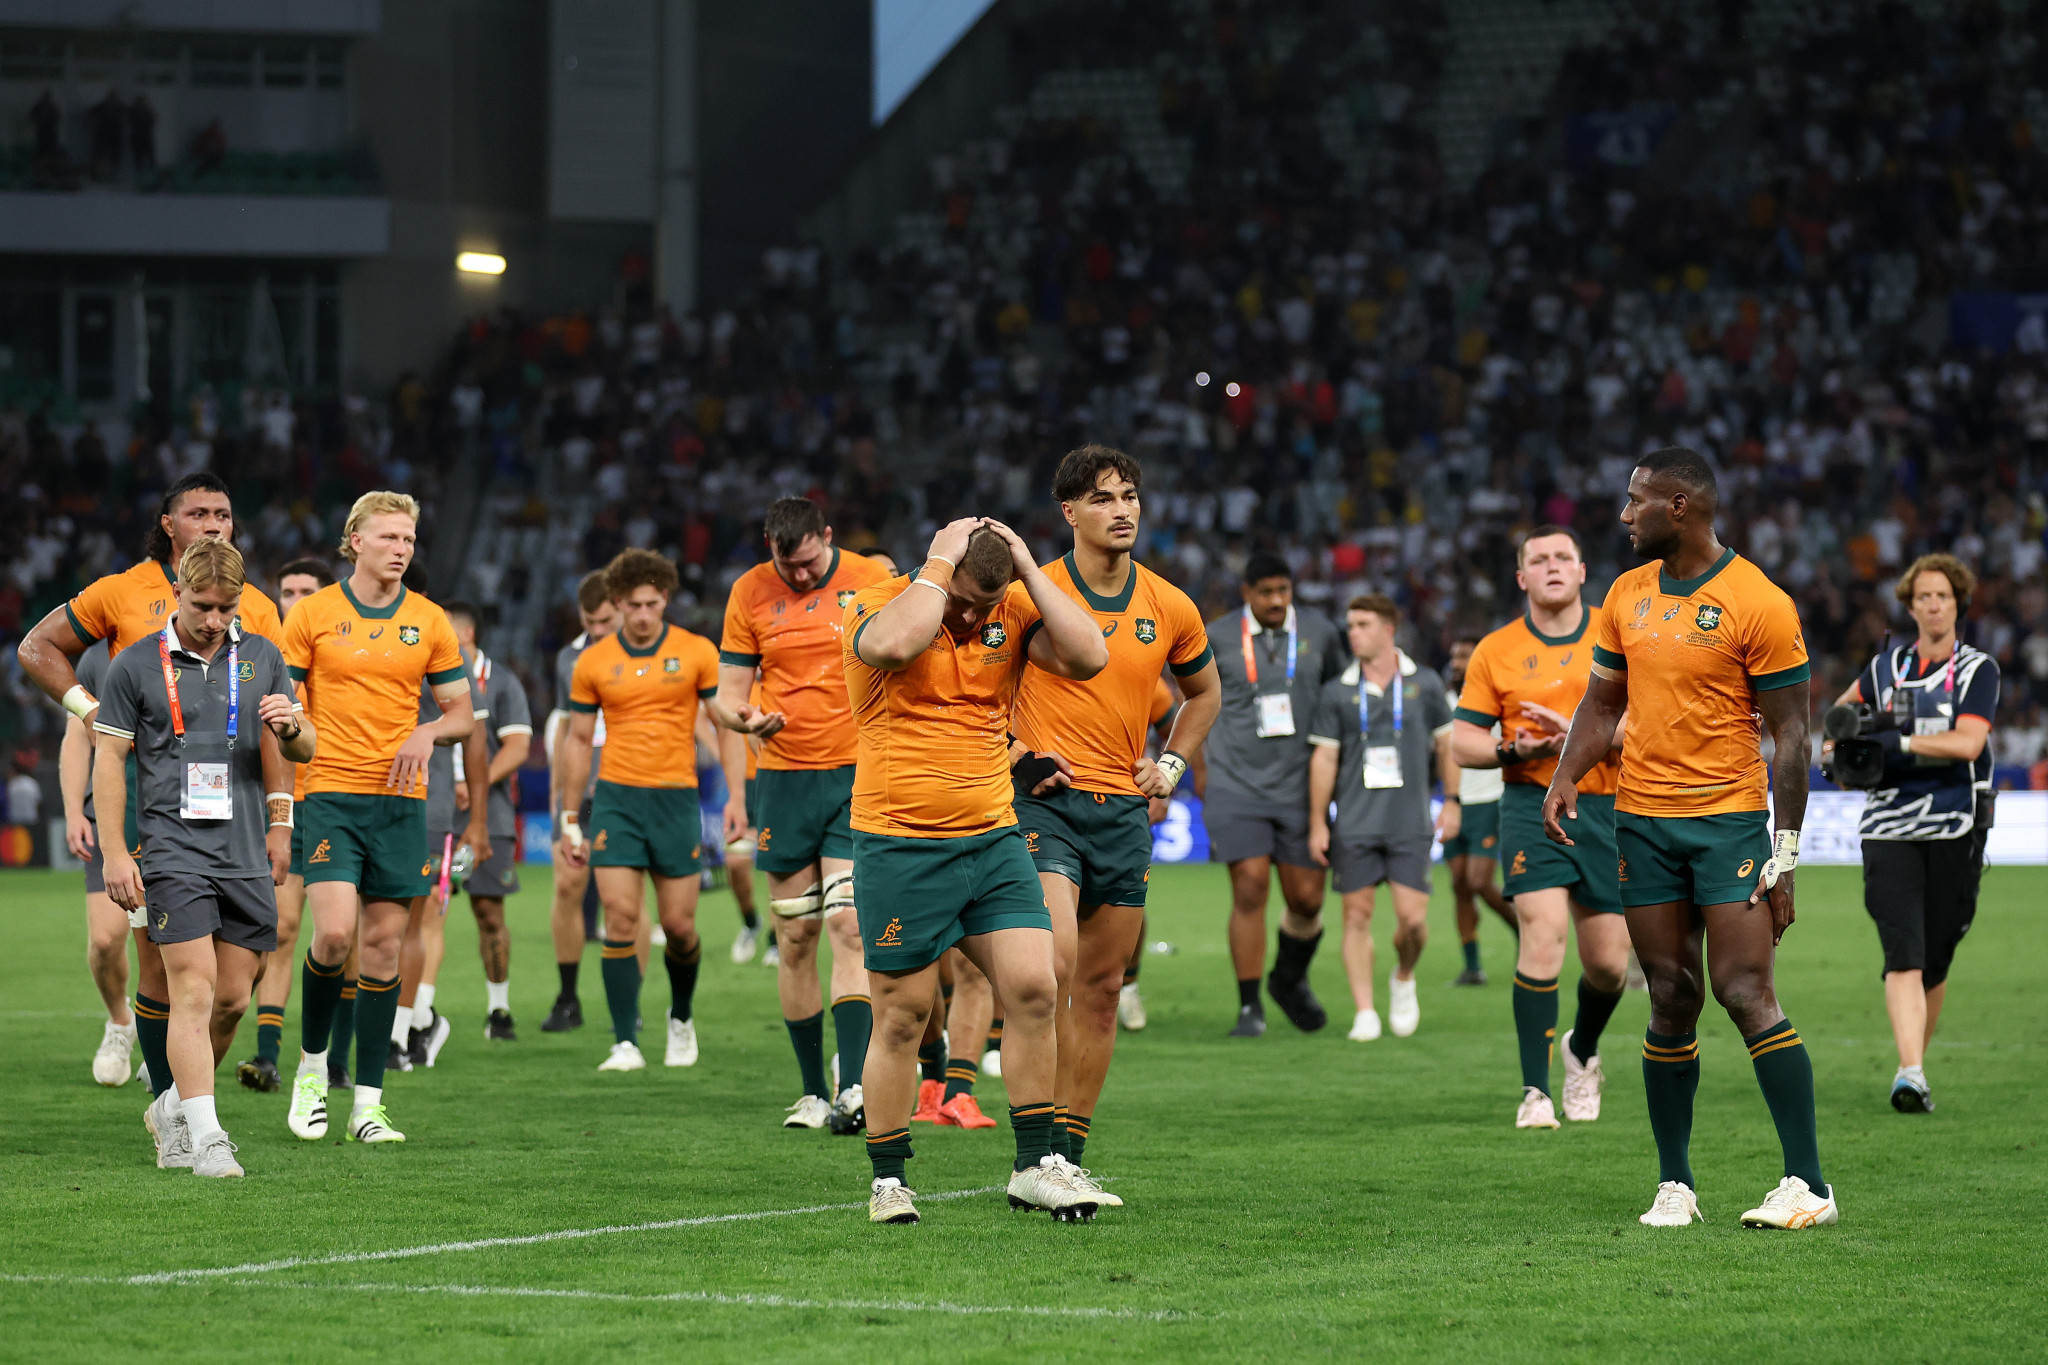 Dejected Australian players walk back after the defeat to Fiji ©Getty Images